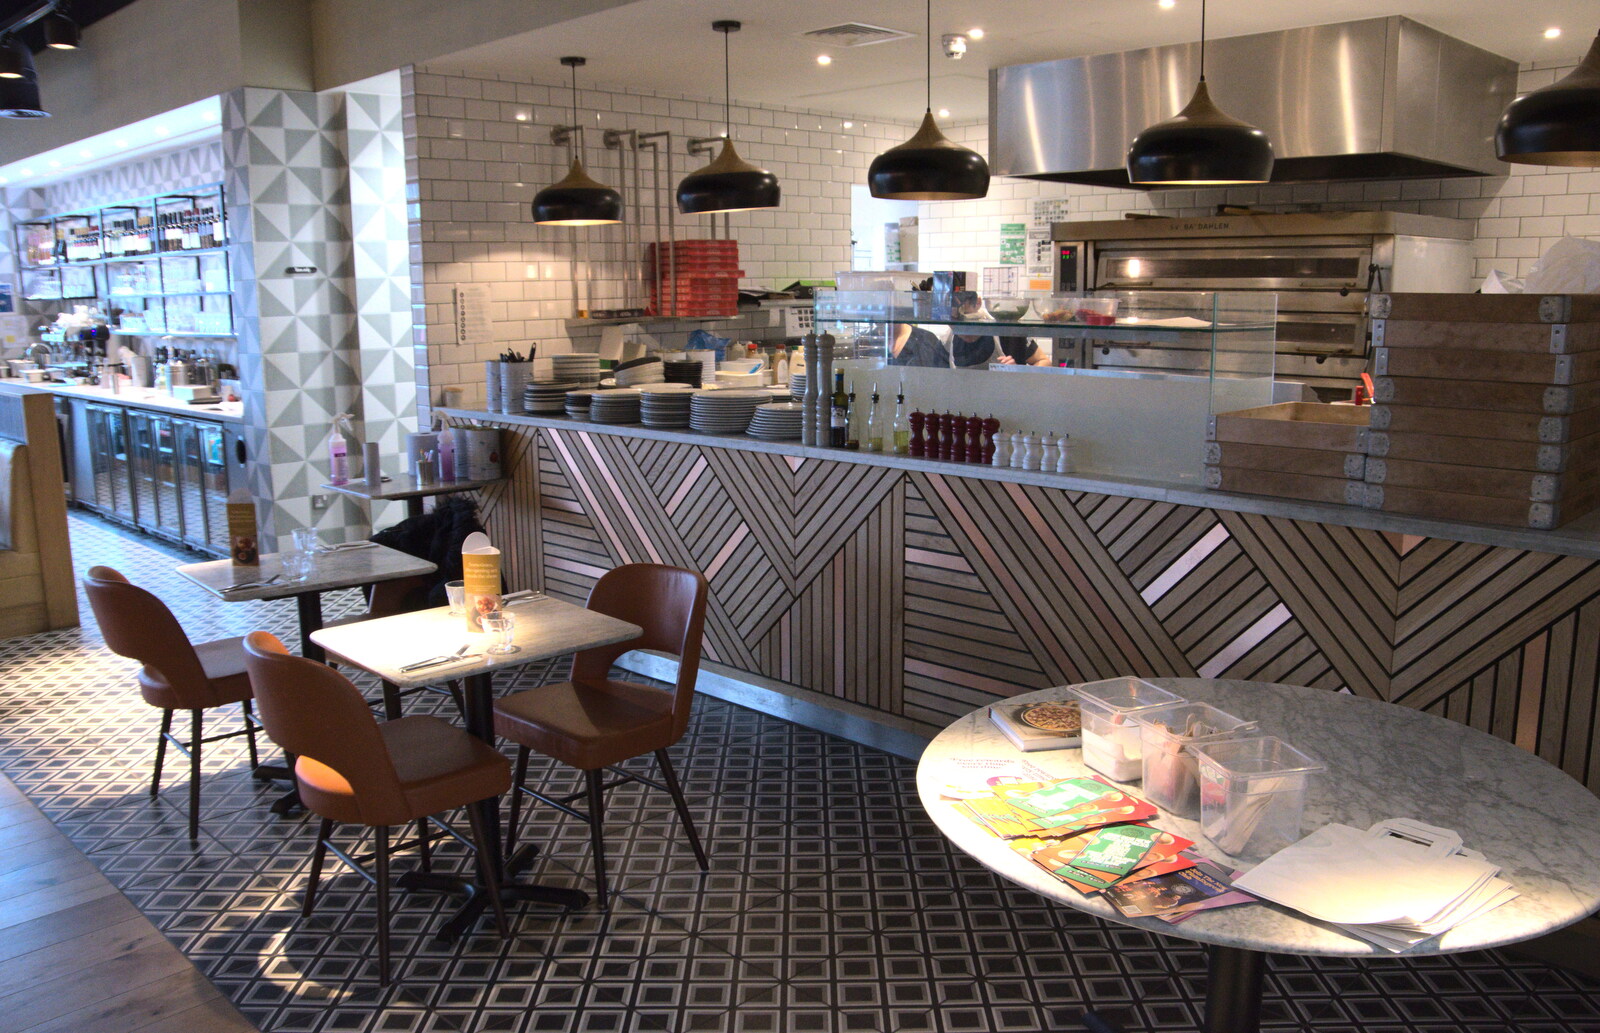 Pizza Express's kitchen area from Chilli Farms, Okehampton and the Oxenham Arms, South Zeal, Devon - 10th April 2023